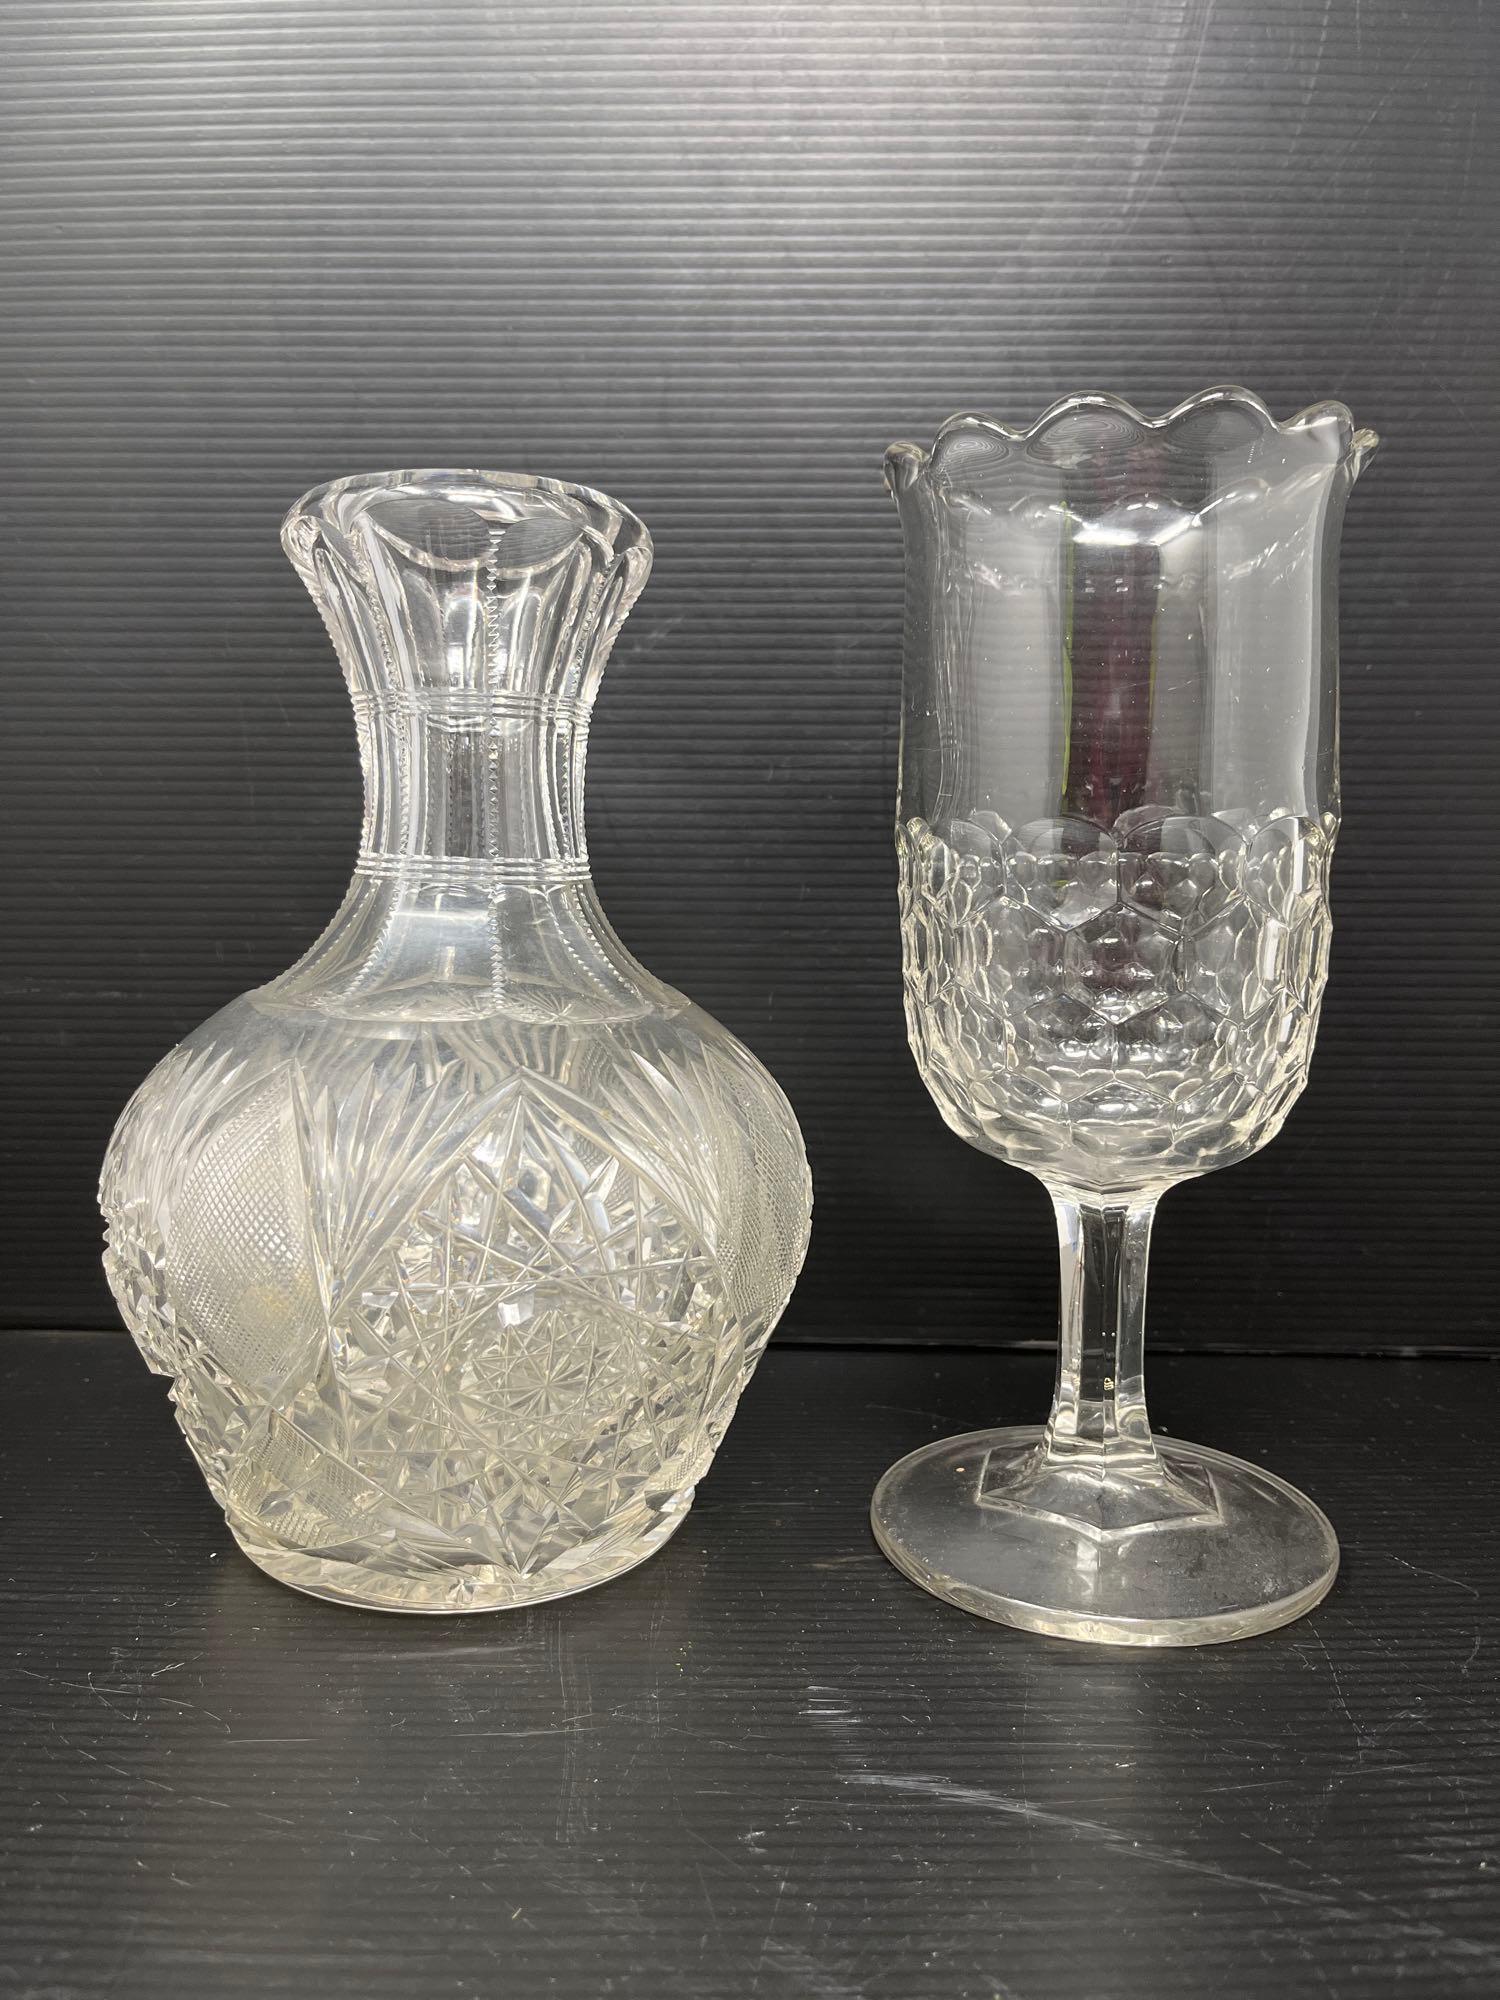 Glass Grouping- Lidded Pedestal Candy Dish, Etched Pitcher, Juice Bottle and Celery Holder